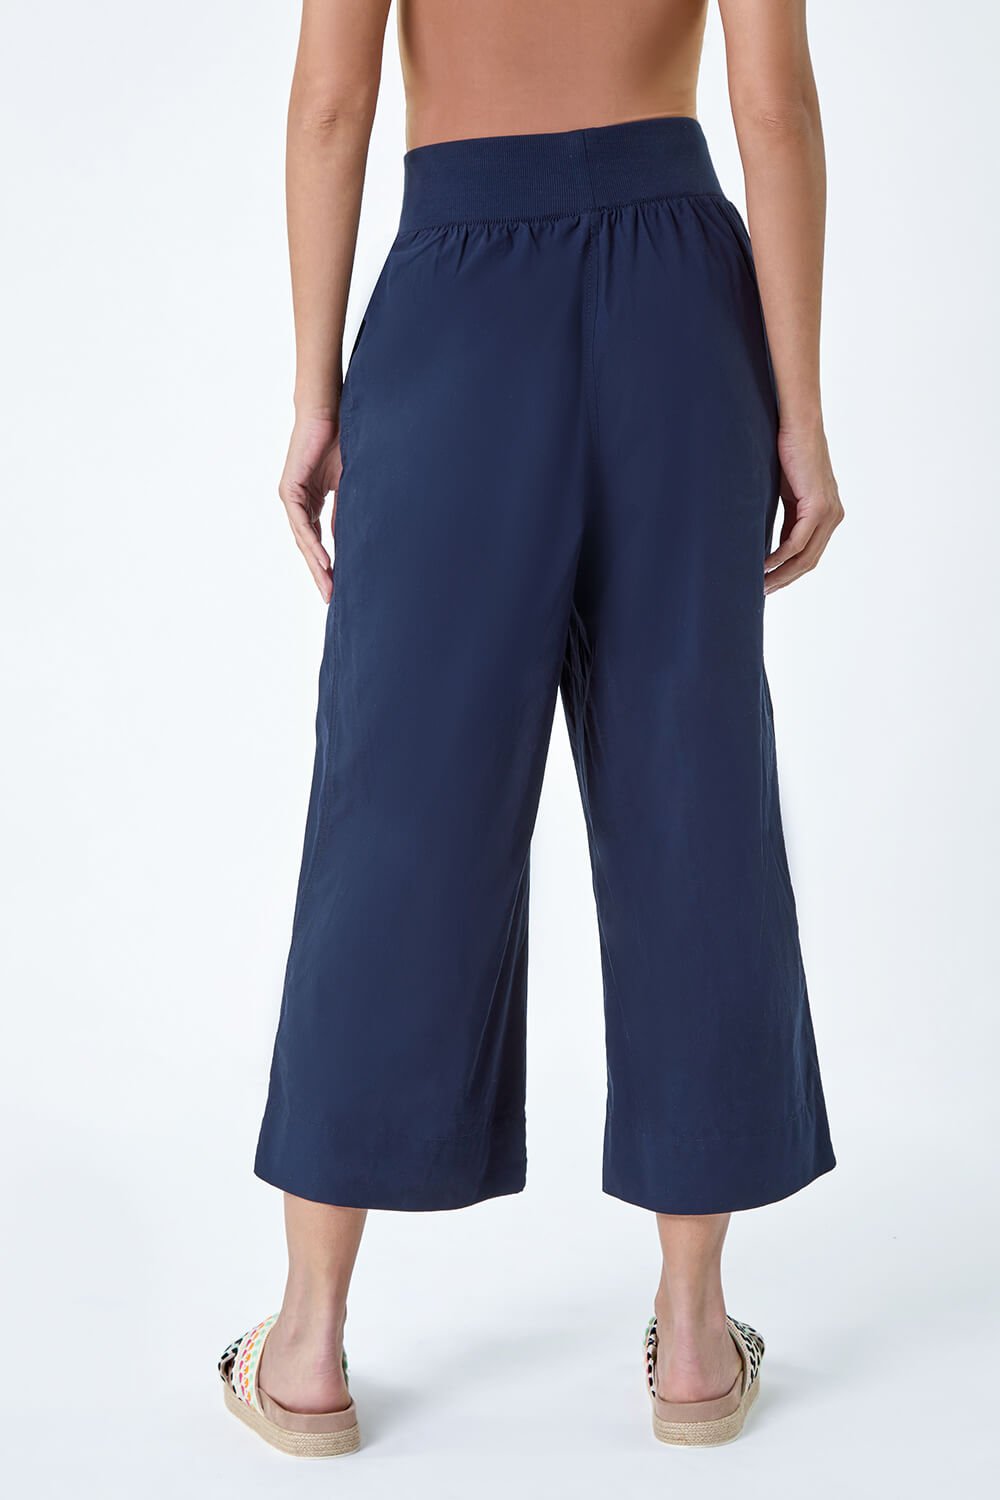 Navy  Wide Leg Cotton Culottes, Image 3 of 5